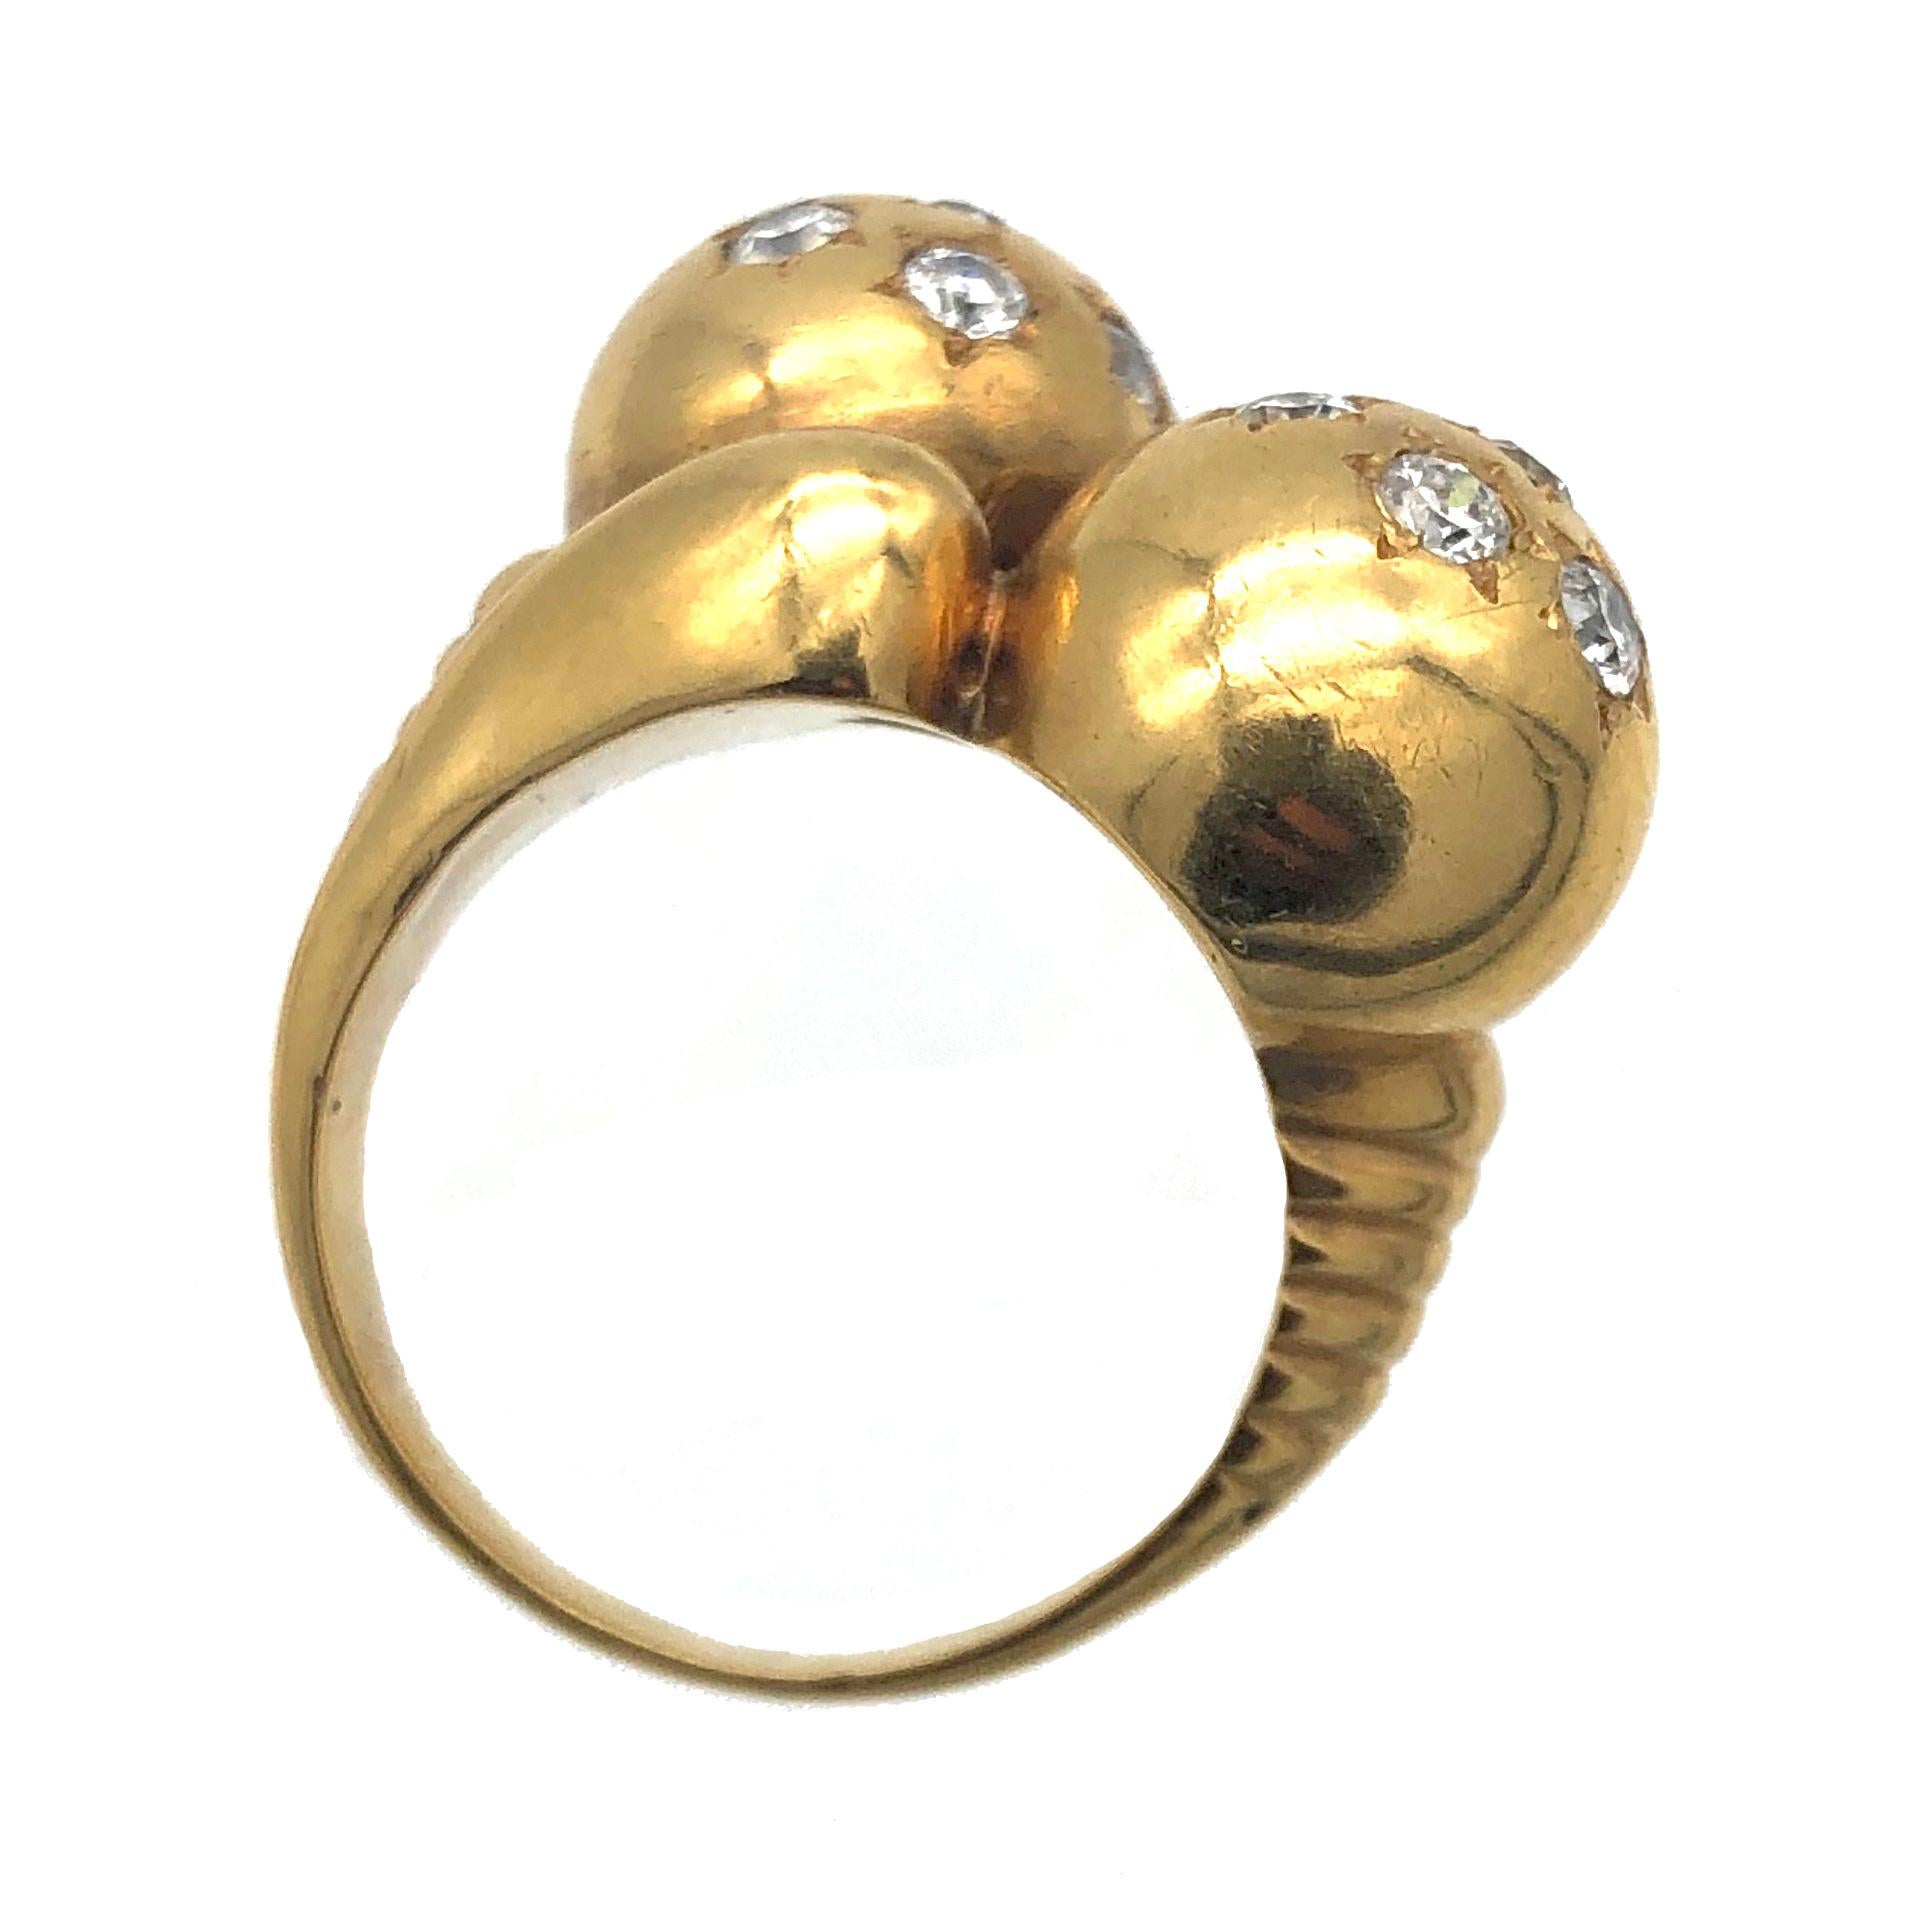 Stylish and elegant mid 1930's ring with a partially ribbed shank holding two diamond set balls. Each ball is decorated with seven diamonds and mounted in star shaped settings. 